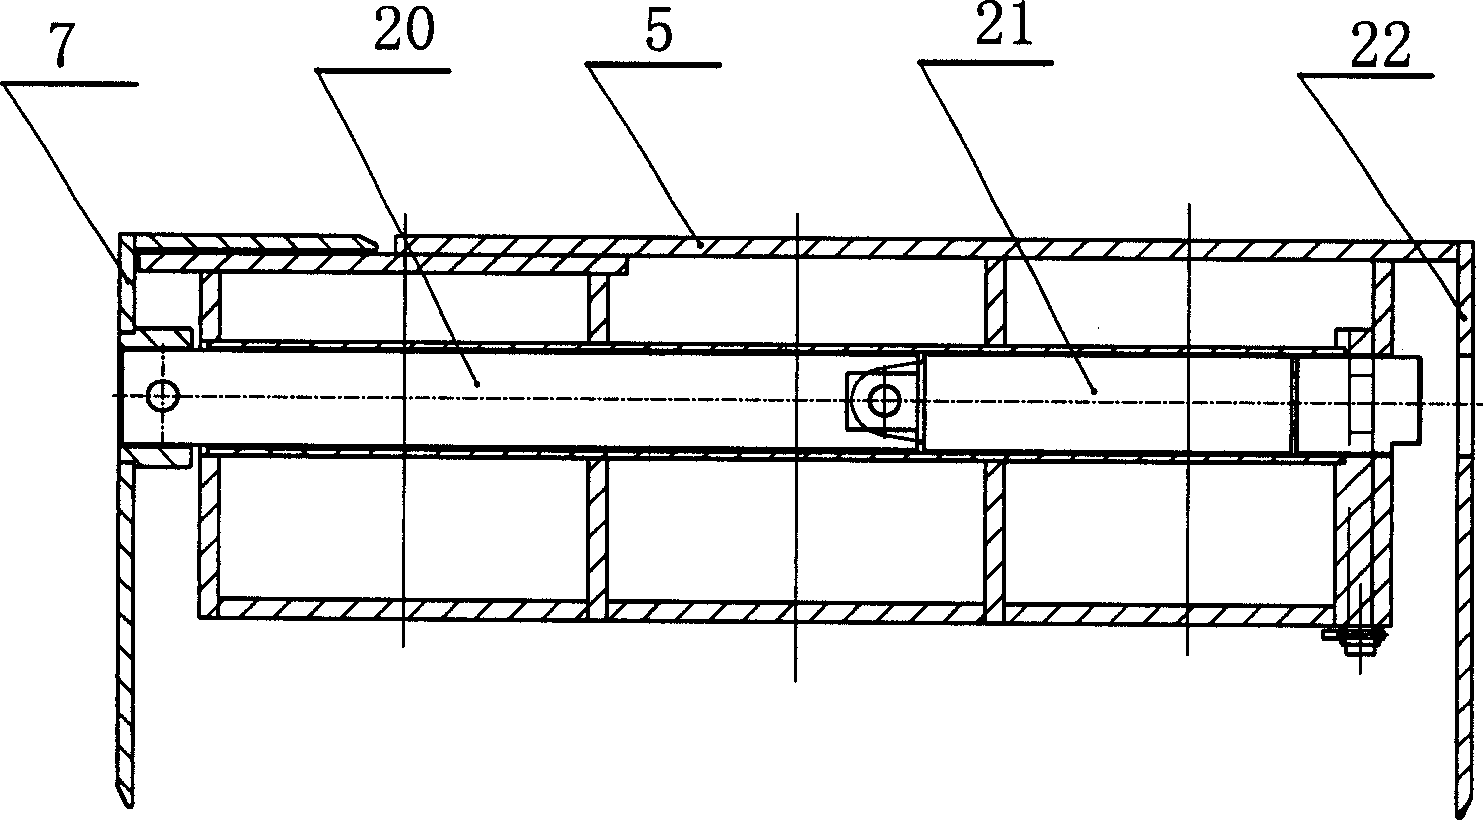 Thick coal-bed shield hydraulic support